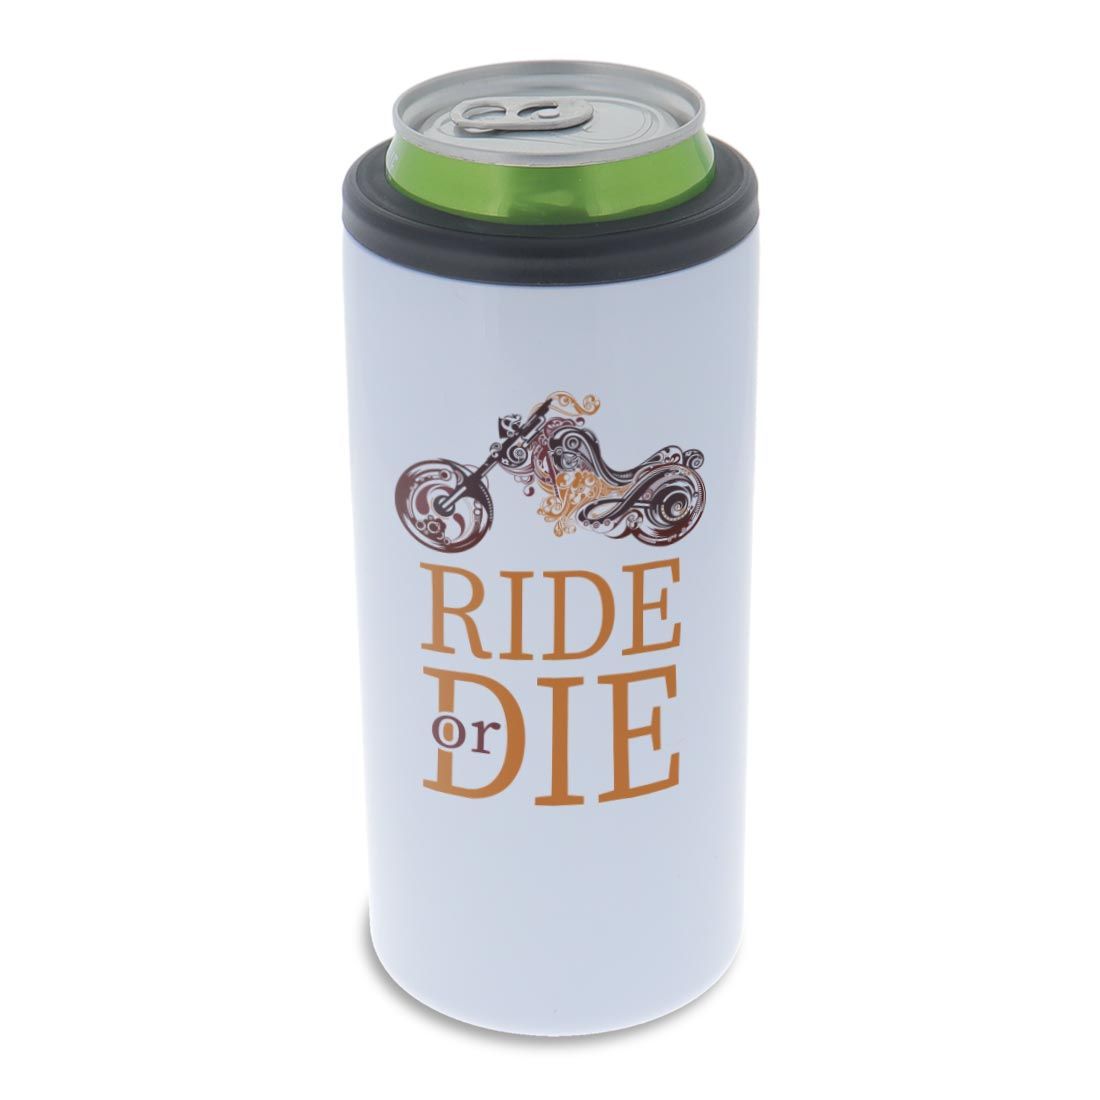 2-in-1 Stainless Steel Can Cooler-Tumbler 12oz